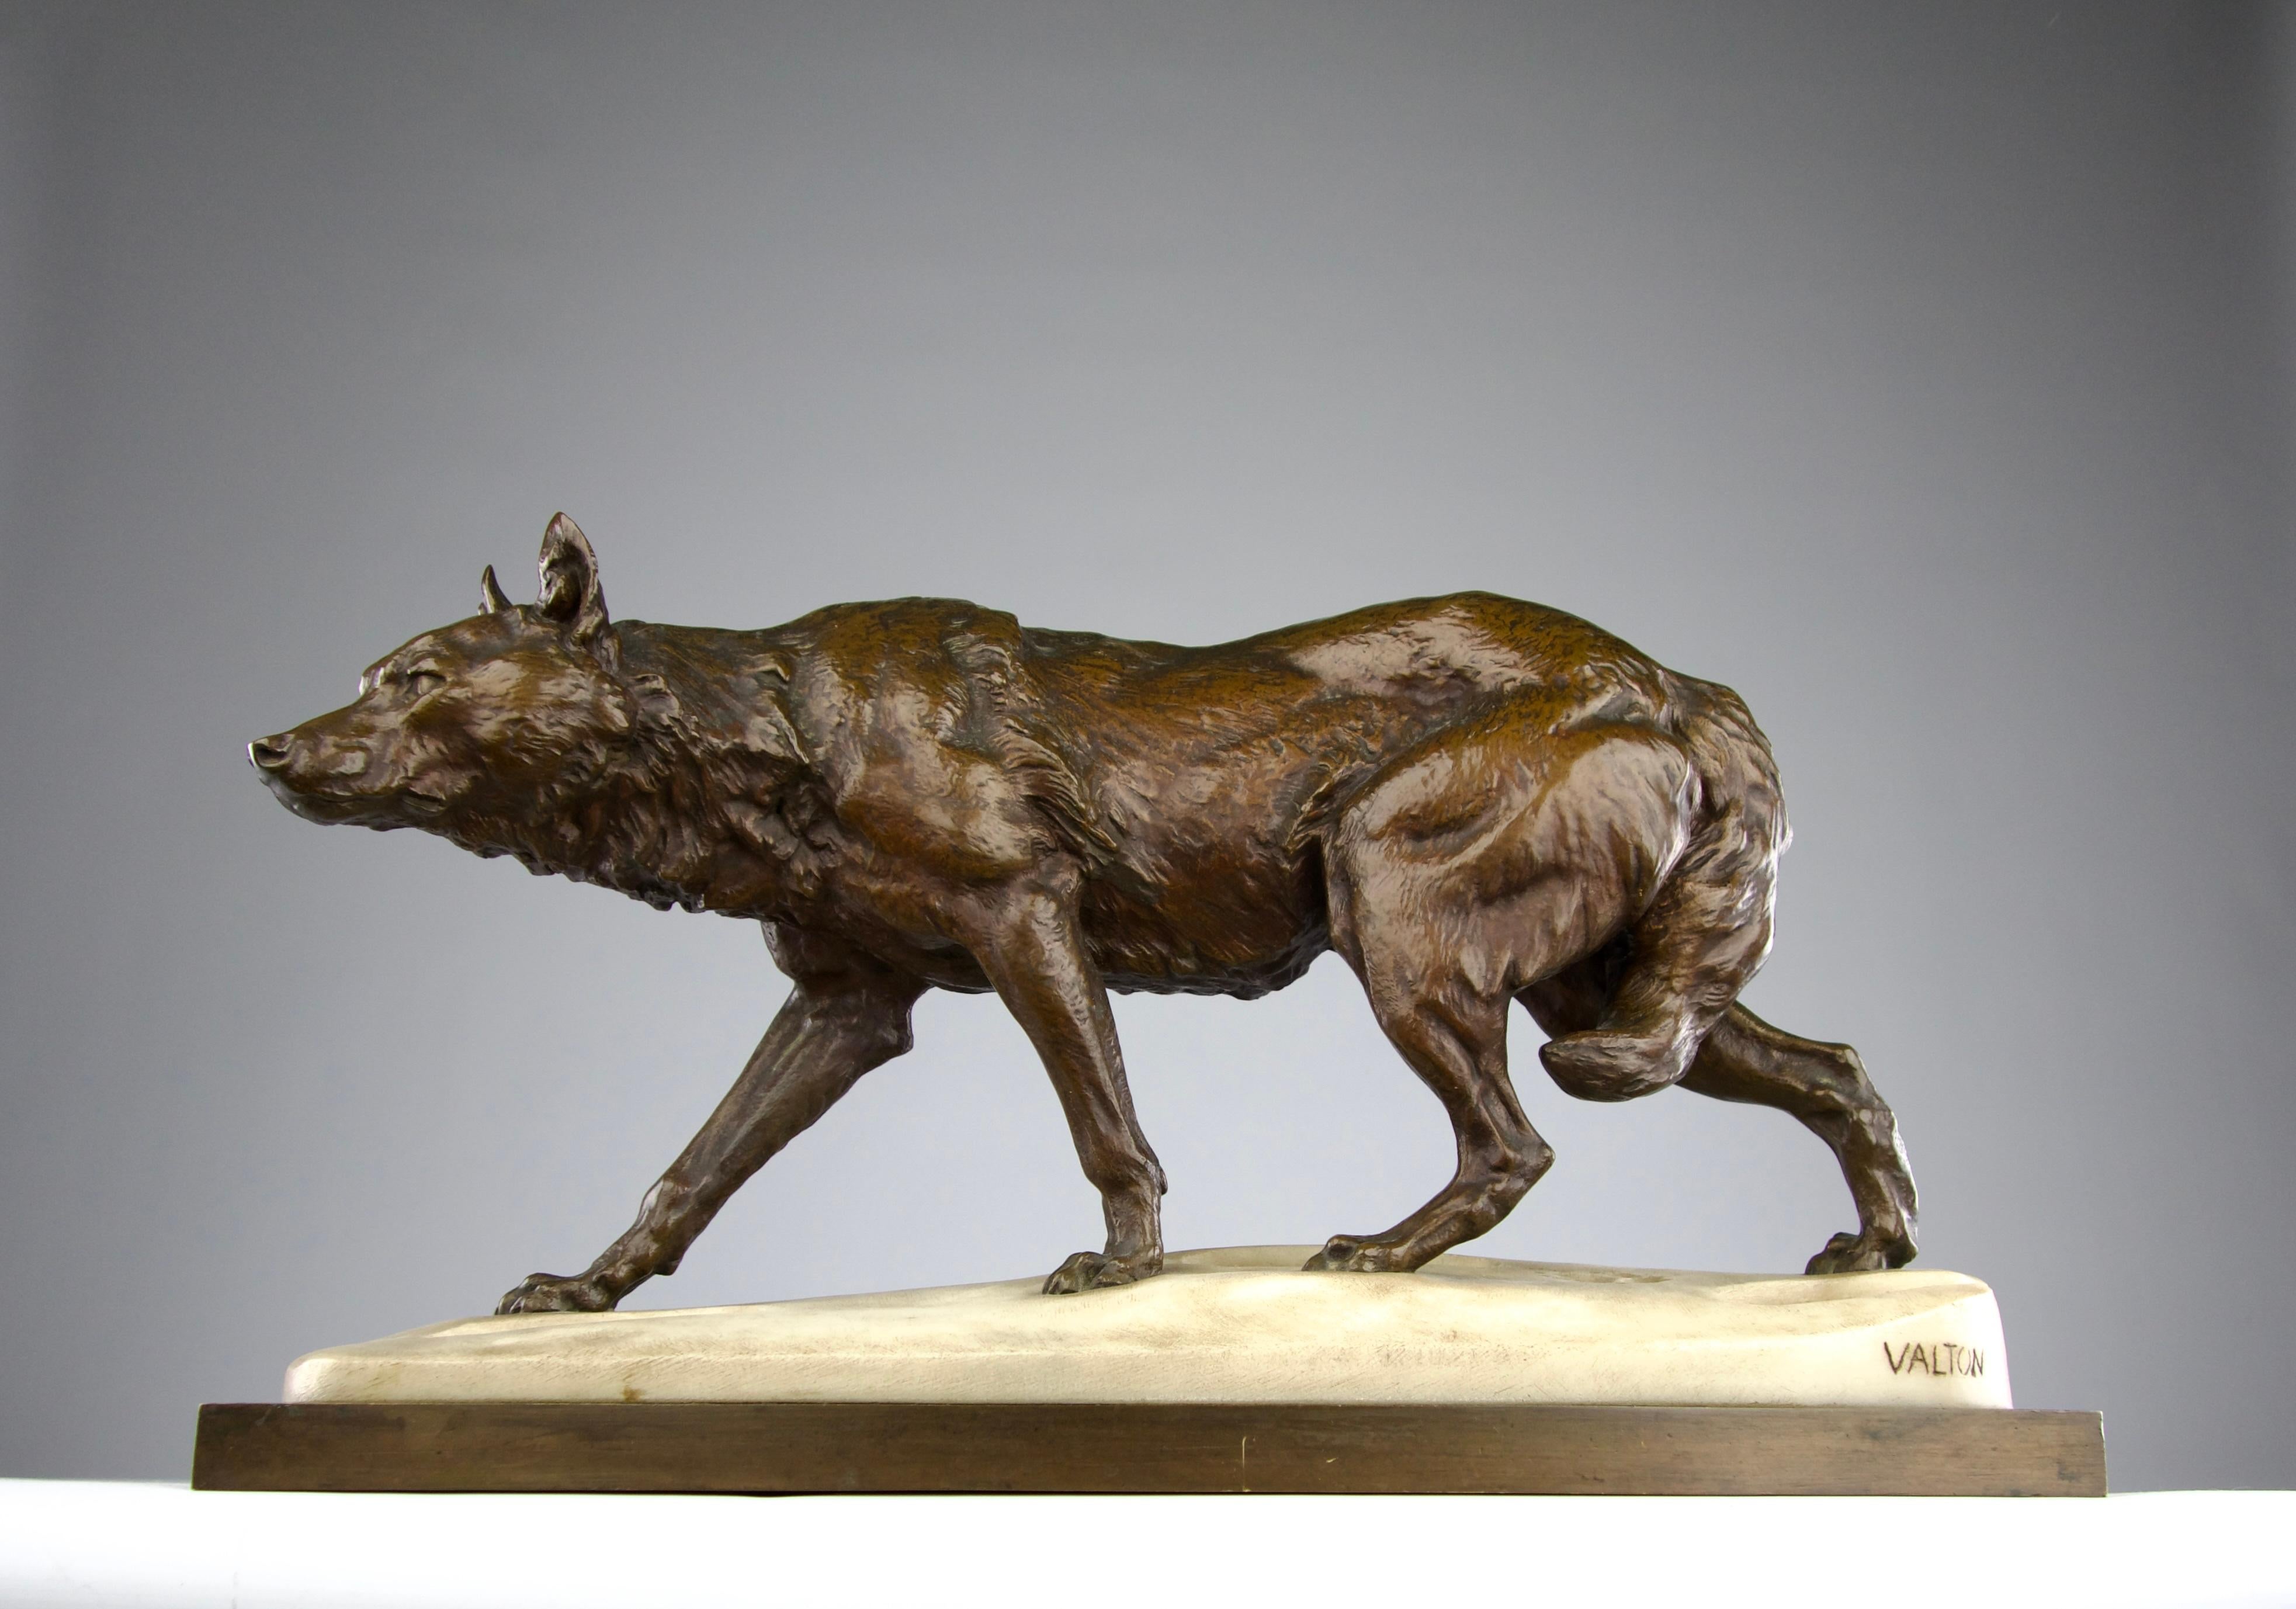 Superb wolf sculpture in bronze and marble flooring simulating snow by the artist Charles Valton. The wolf dutifully follows an adventurer whose steps are carved into the snow. A beautifully executed work with exquisite detailing and patina on the